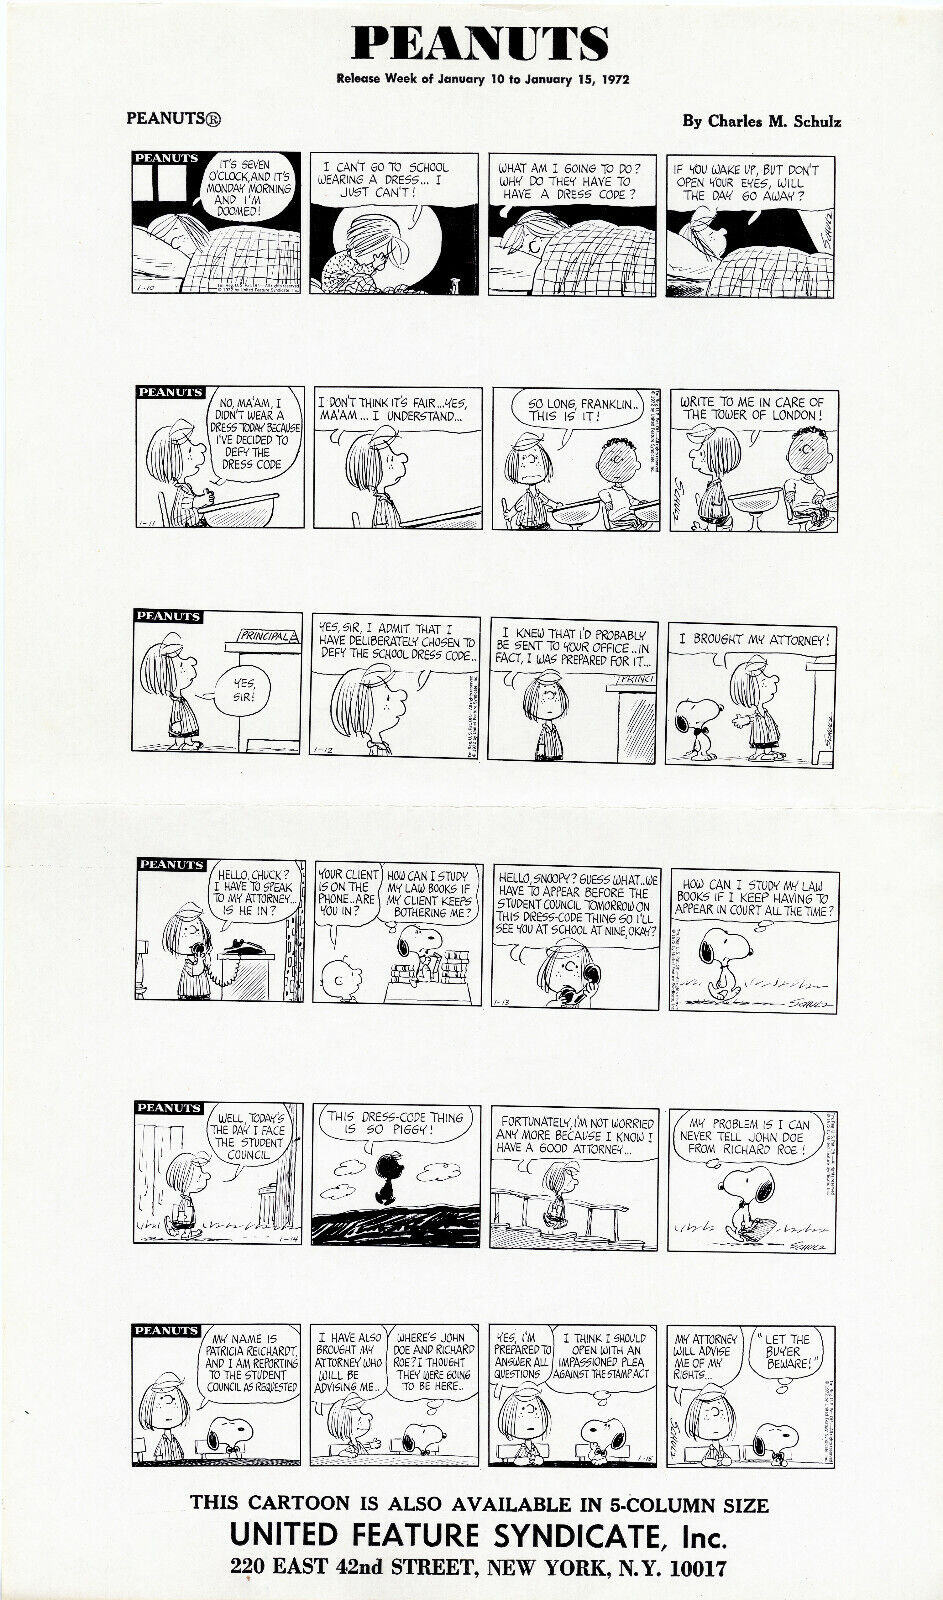 6 Daily Peanuts Strips by Charles Schulz Jan. 10 to Jan. 15 1972 Photostat Print